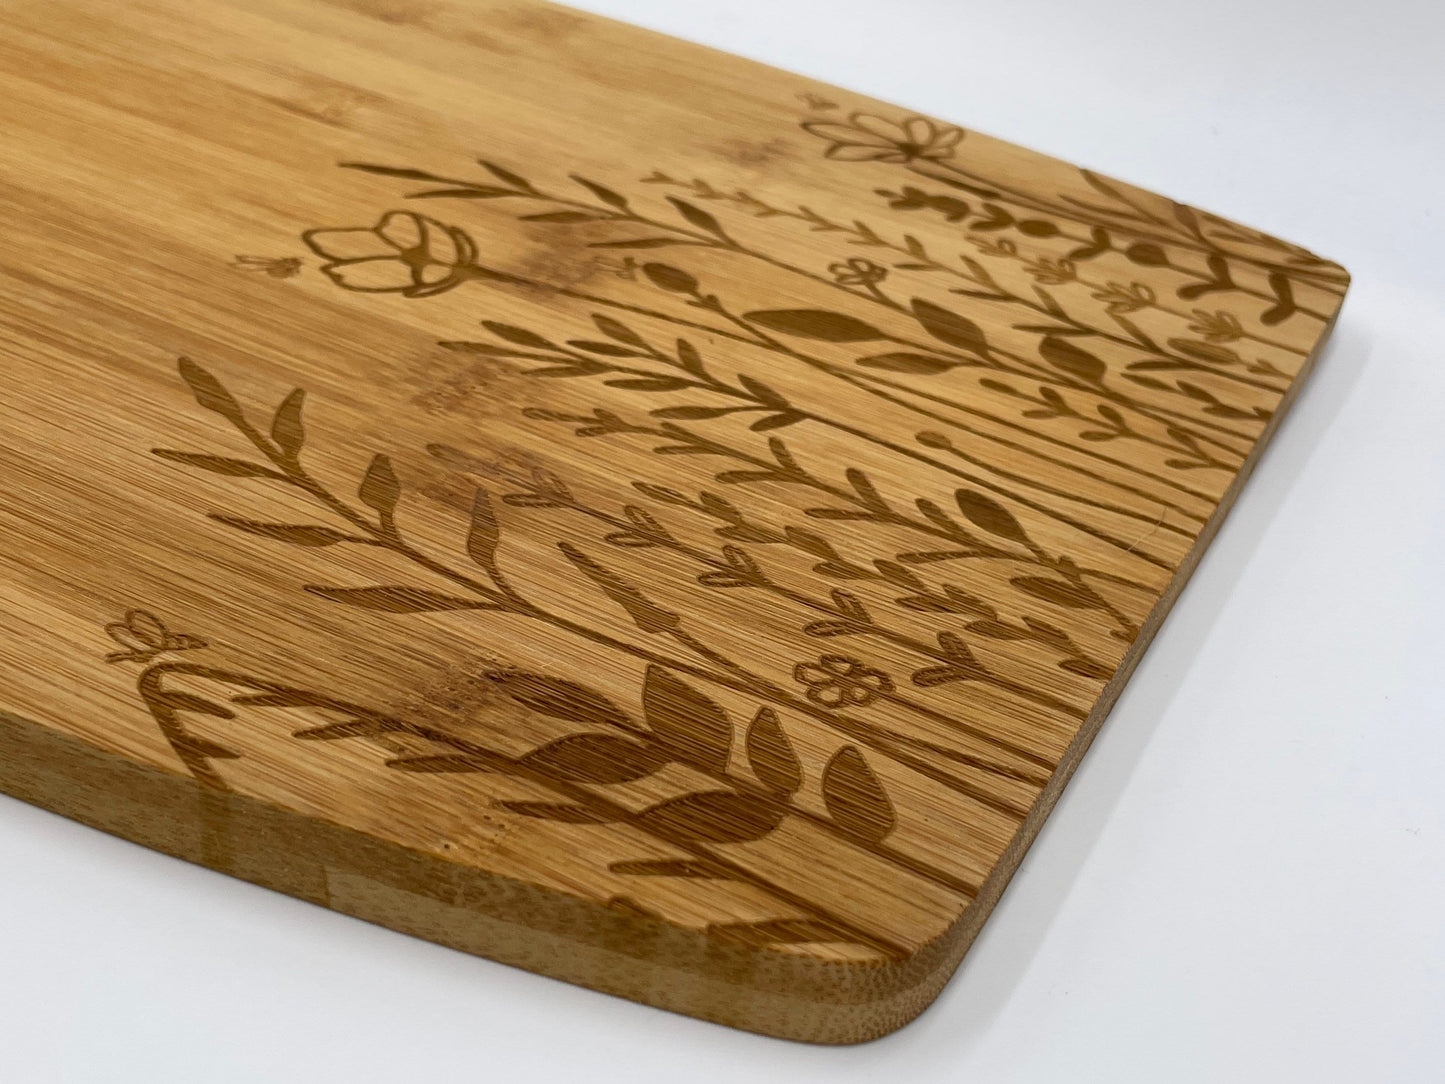 Engraved Wildflower and Bee Bamboo Cutting Board, Home Decor